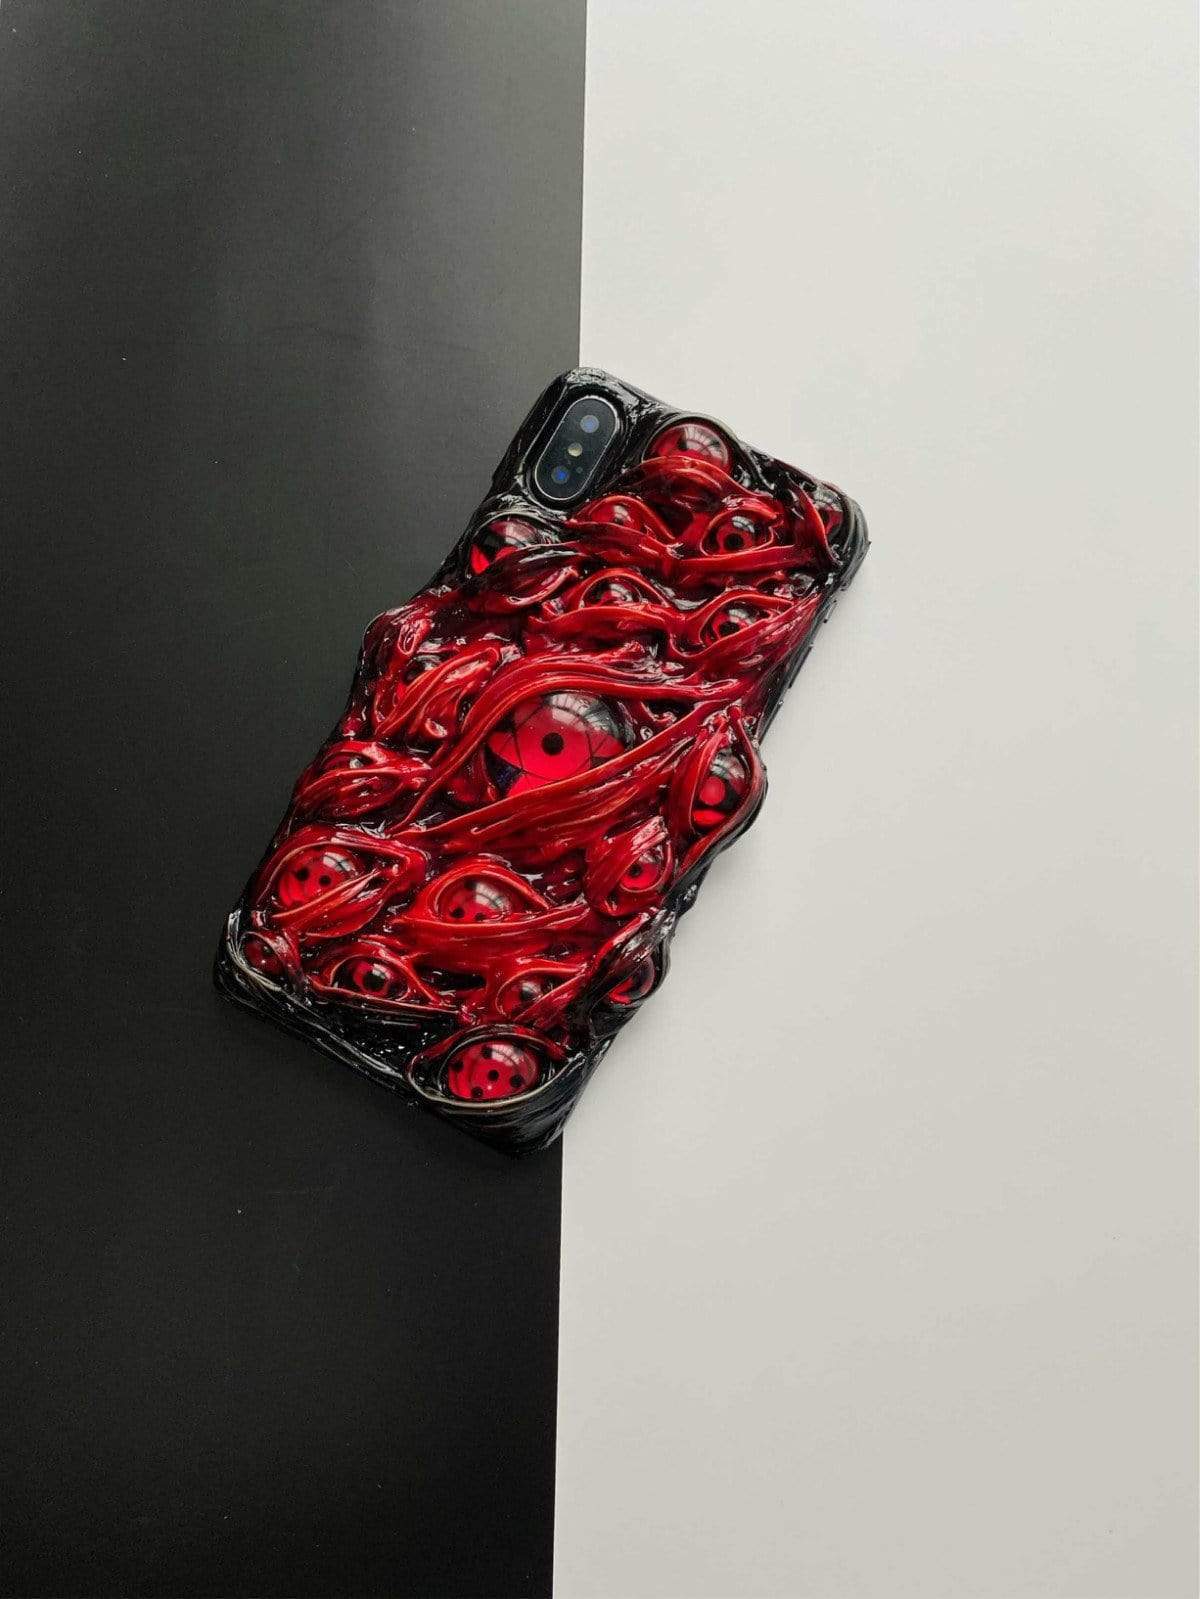 Techypop iPhone Case iPhone 12 Mini Blood is Always Watching Designer iPhone Case For iPhone 12 SE 11 Pro Max X XS Max XR 7 8 Plus